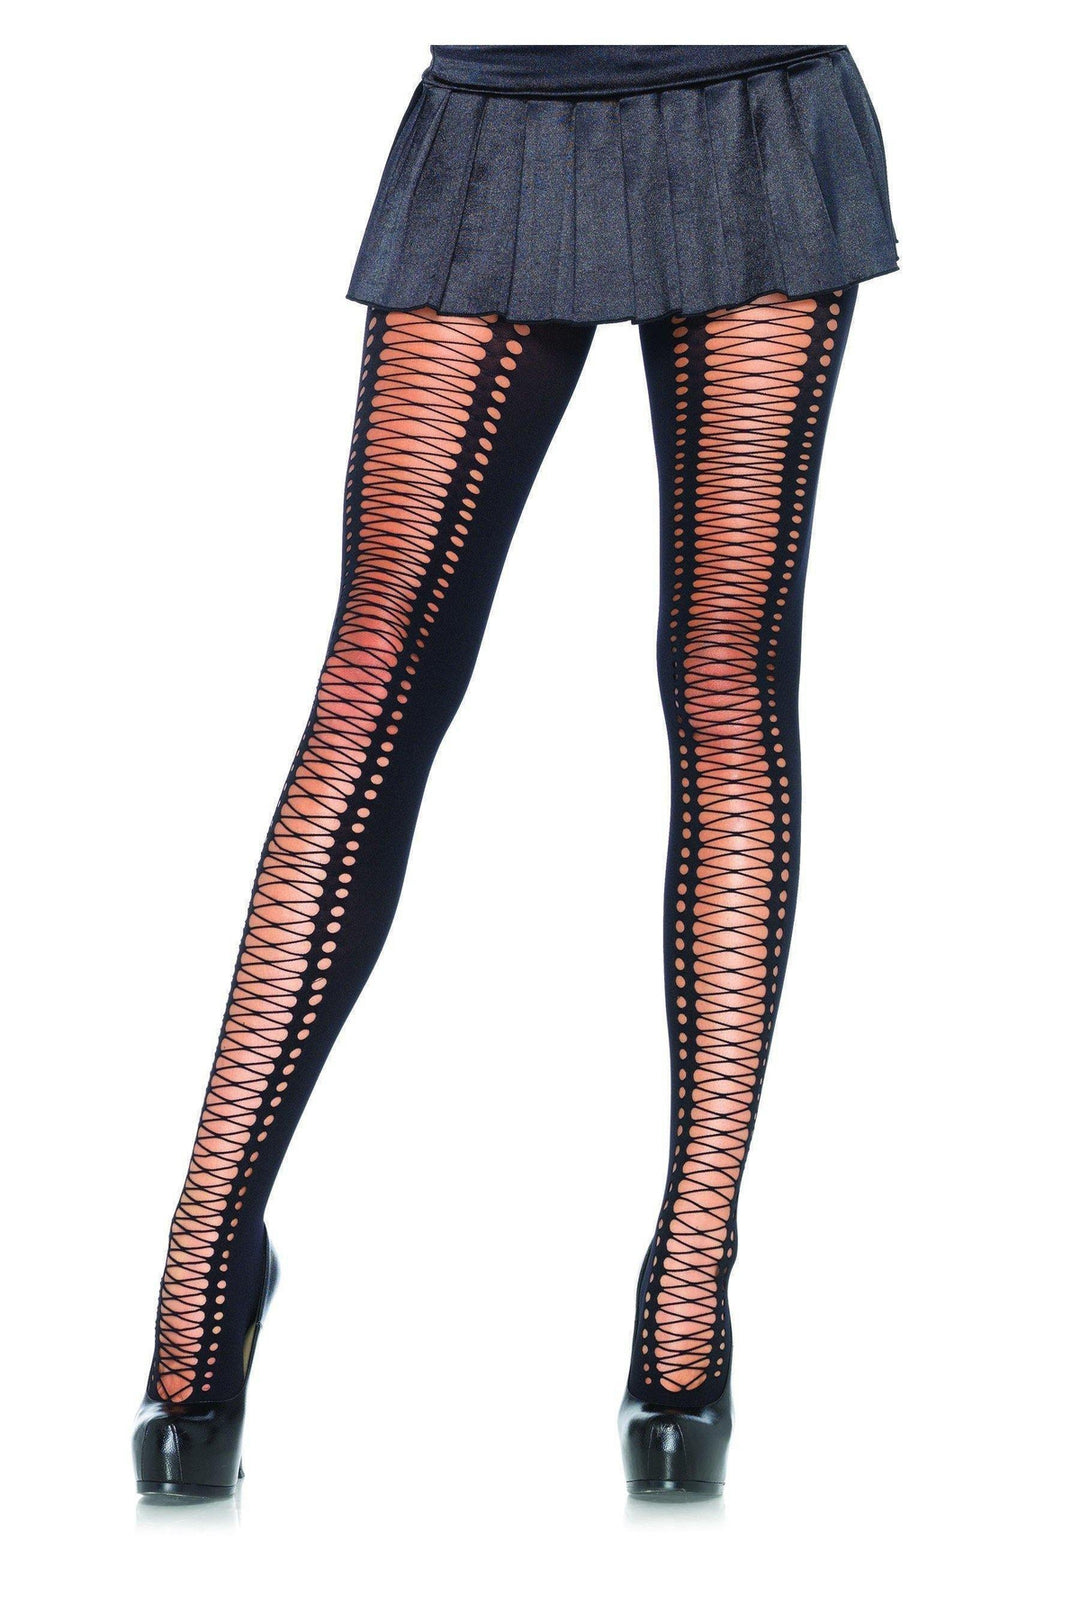 Spandex Seamless Crochet Lace Up Tights-Leg Avenue-SEXYSHOES.COM